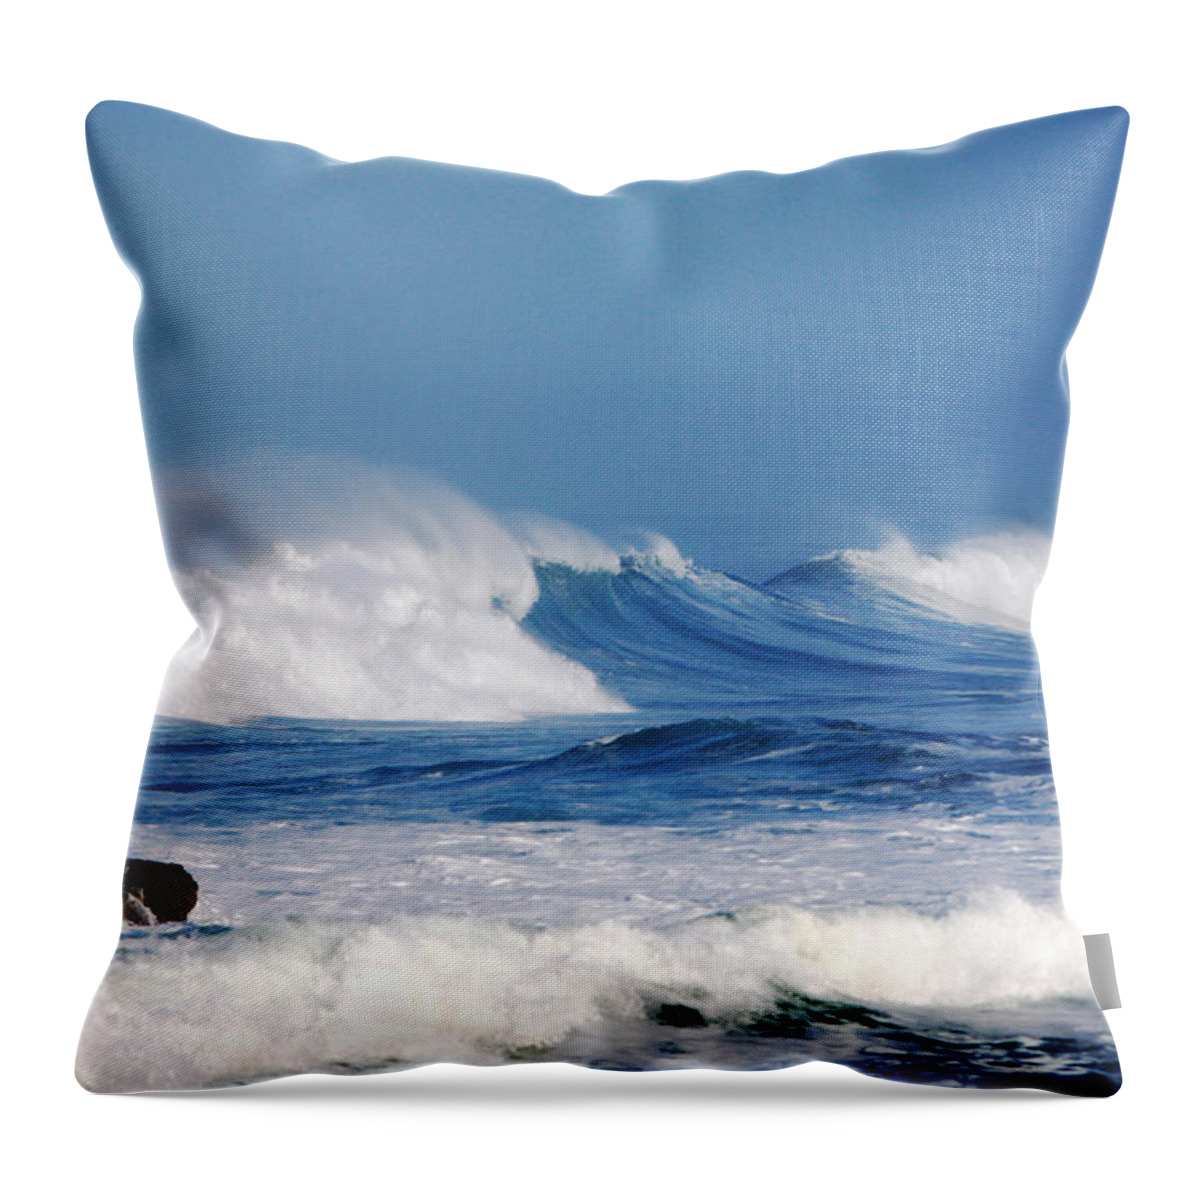 Seascape Art Throw Pillow featuring the photograph Wild Blue by Kandy Hurley